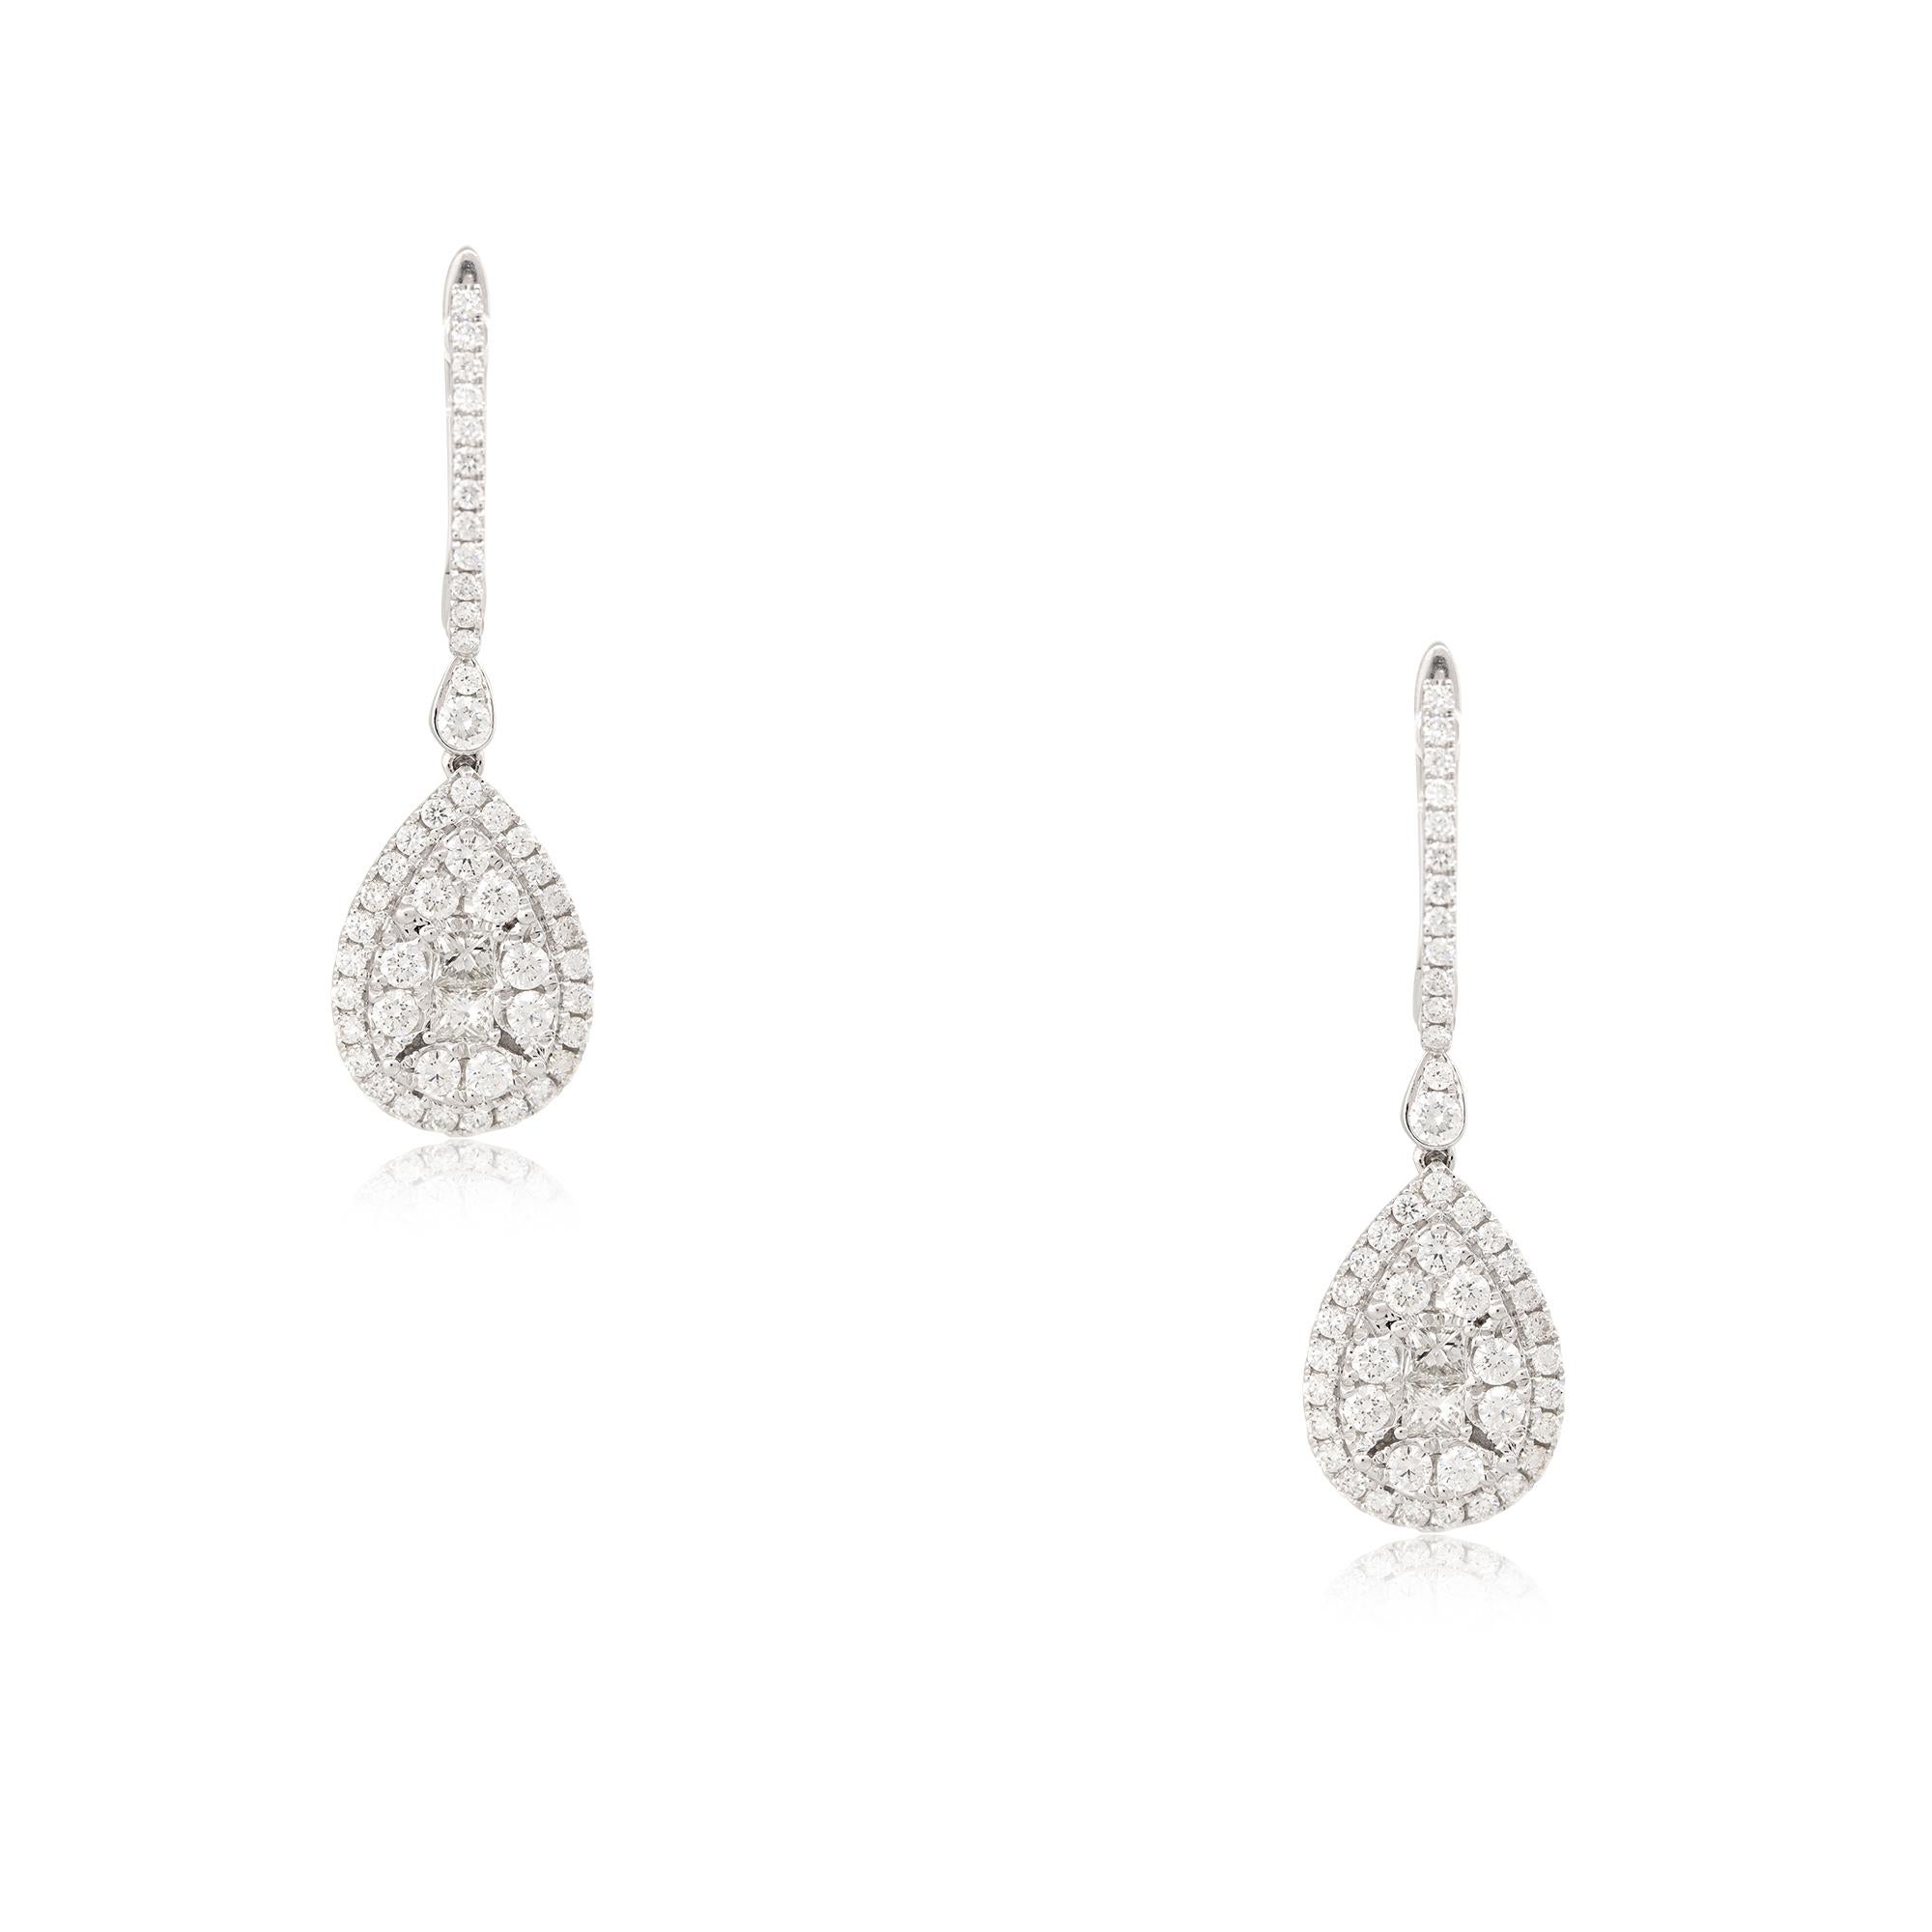 18 Karat White Gold 1.56 Carat Diamond Mosaic Tear Drop Earrings
Material: 18 Karat White Gold
Diamond Details: There are approximately 1.56 carats of Round Brilliant and Princess cut Diamonds. All diamonds are approximately G/H in color and